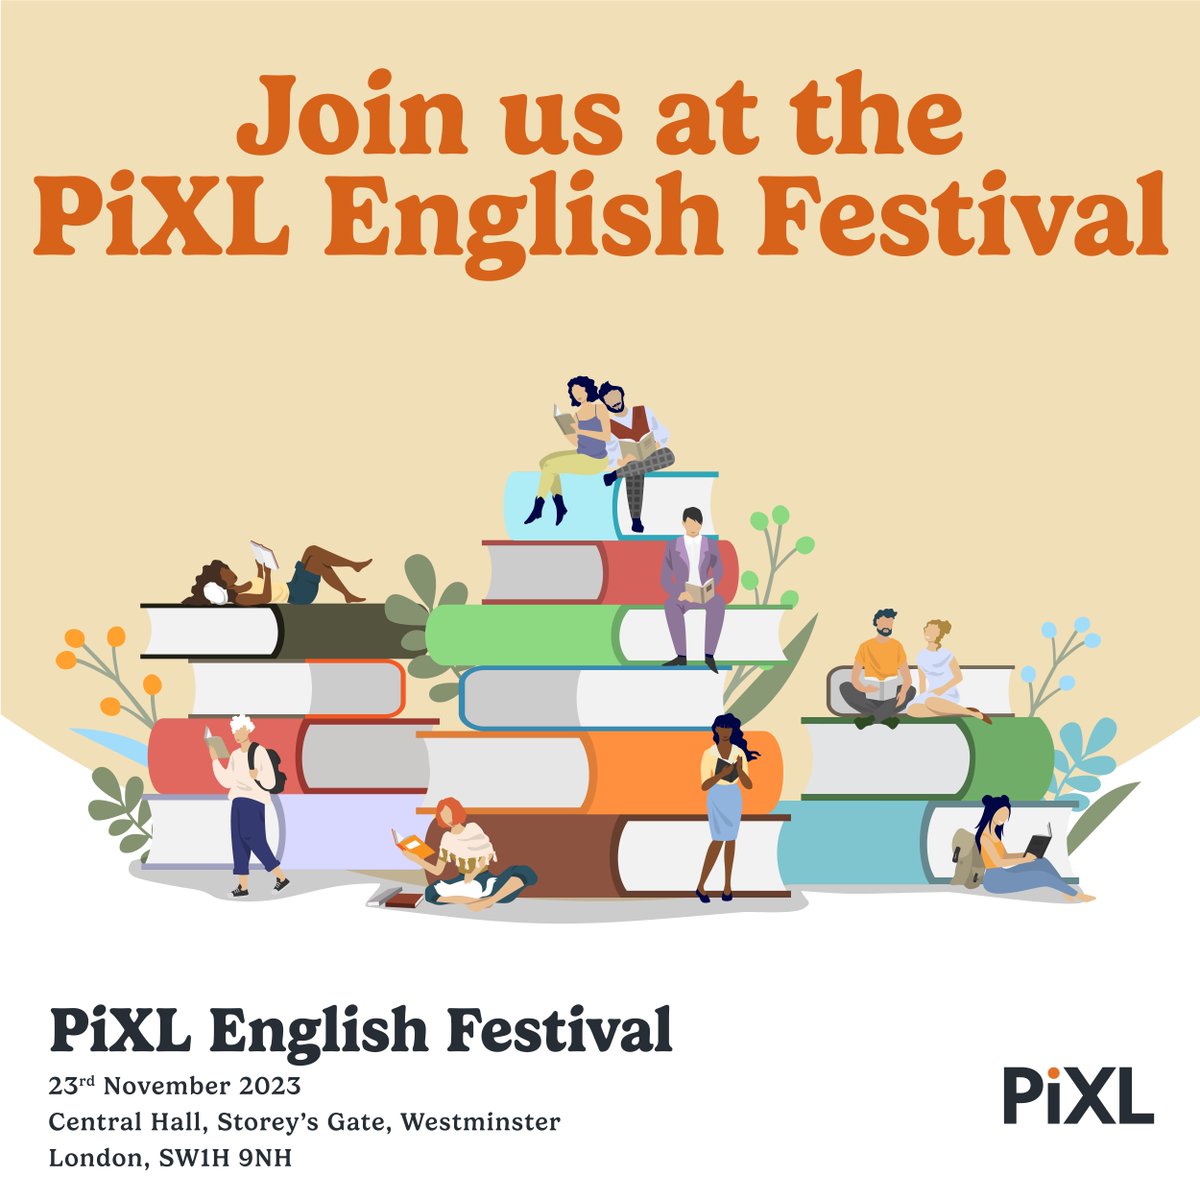 Our highly anticipated #PiXLEnglish Festival is only 1️⃣ week away 😱 ❗️Last chance to secure your spot! 👉ow.ly/vQcI50Q8cH7 Not a #PiXLMember? You don't have to miss out! Get your ticket here: 👉ow.ly/OKOs50Q8cH6 #Secondary #Post16